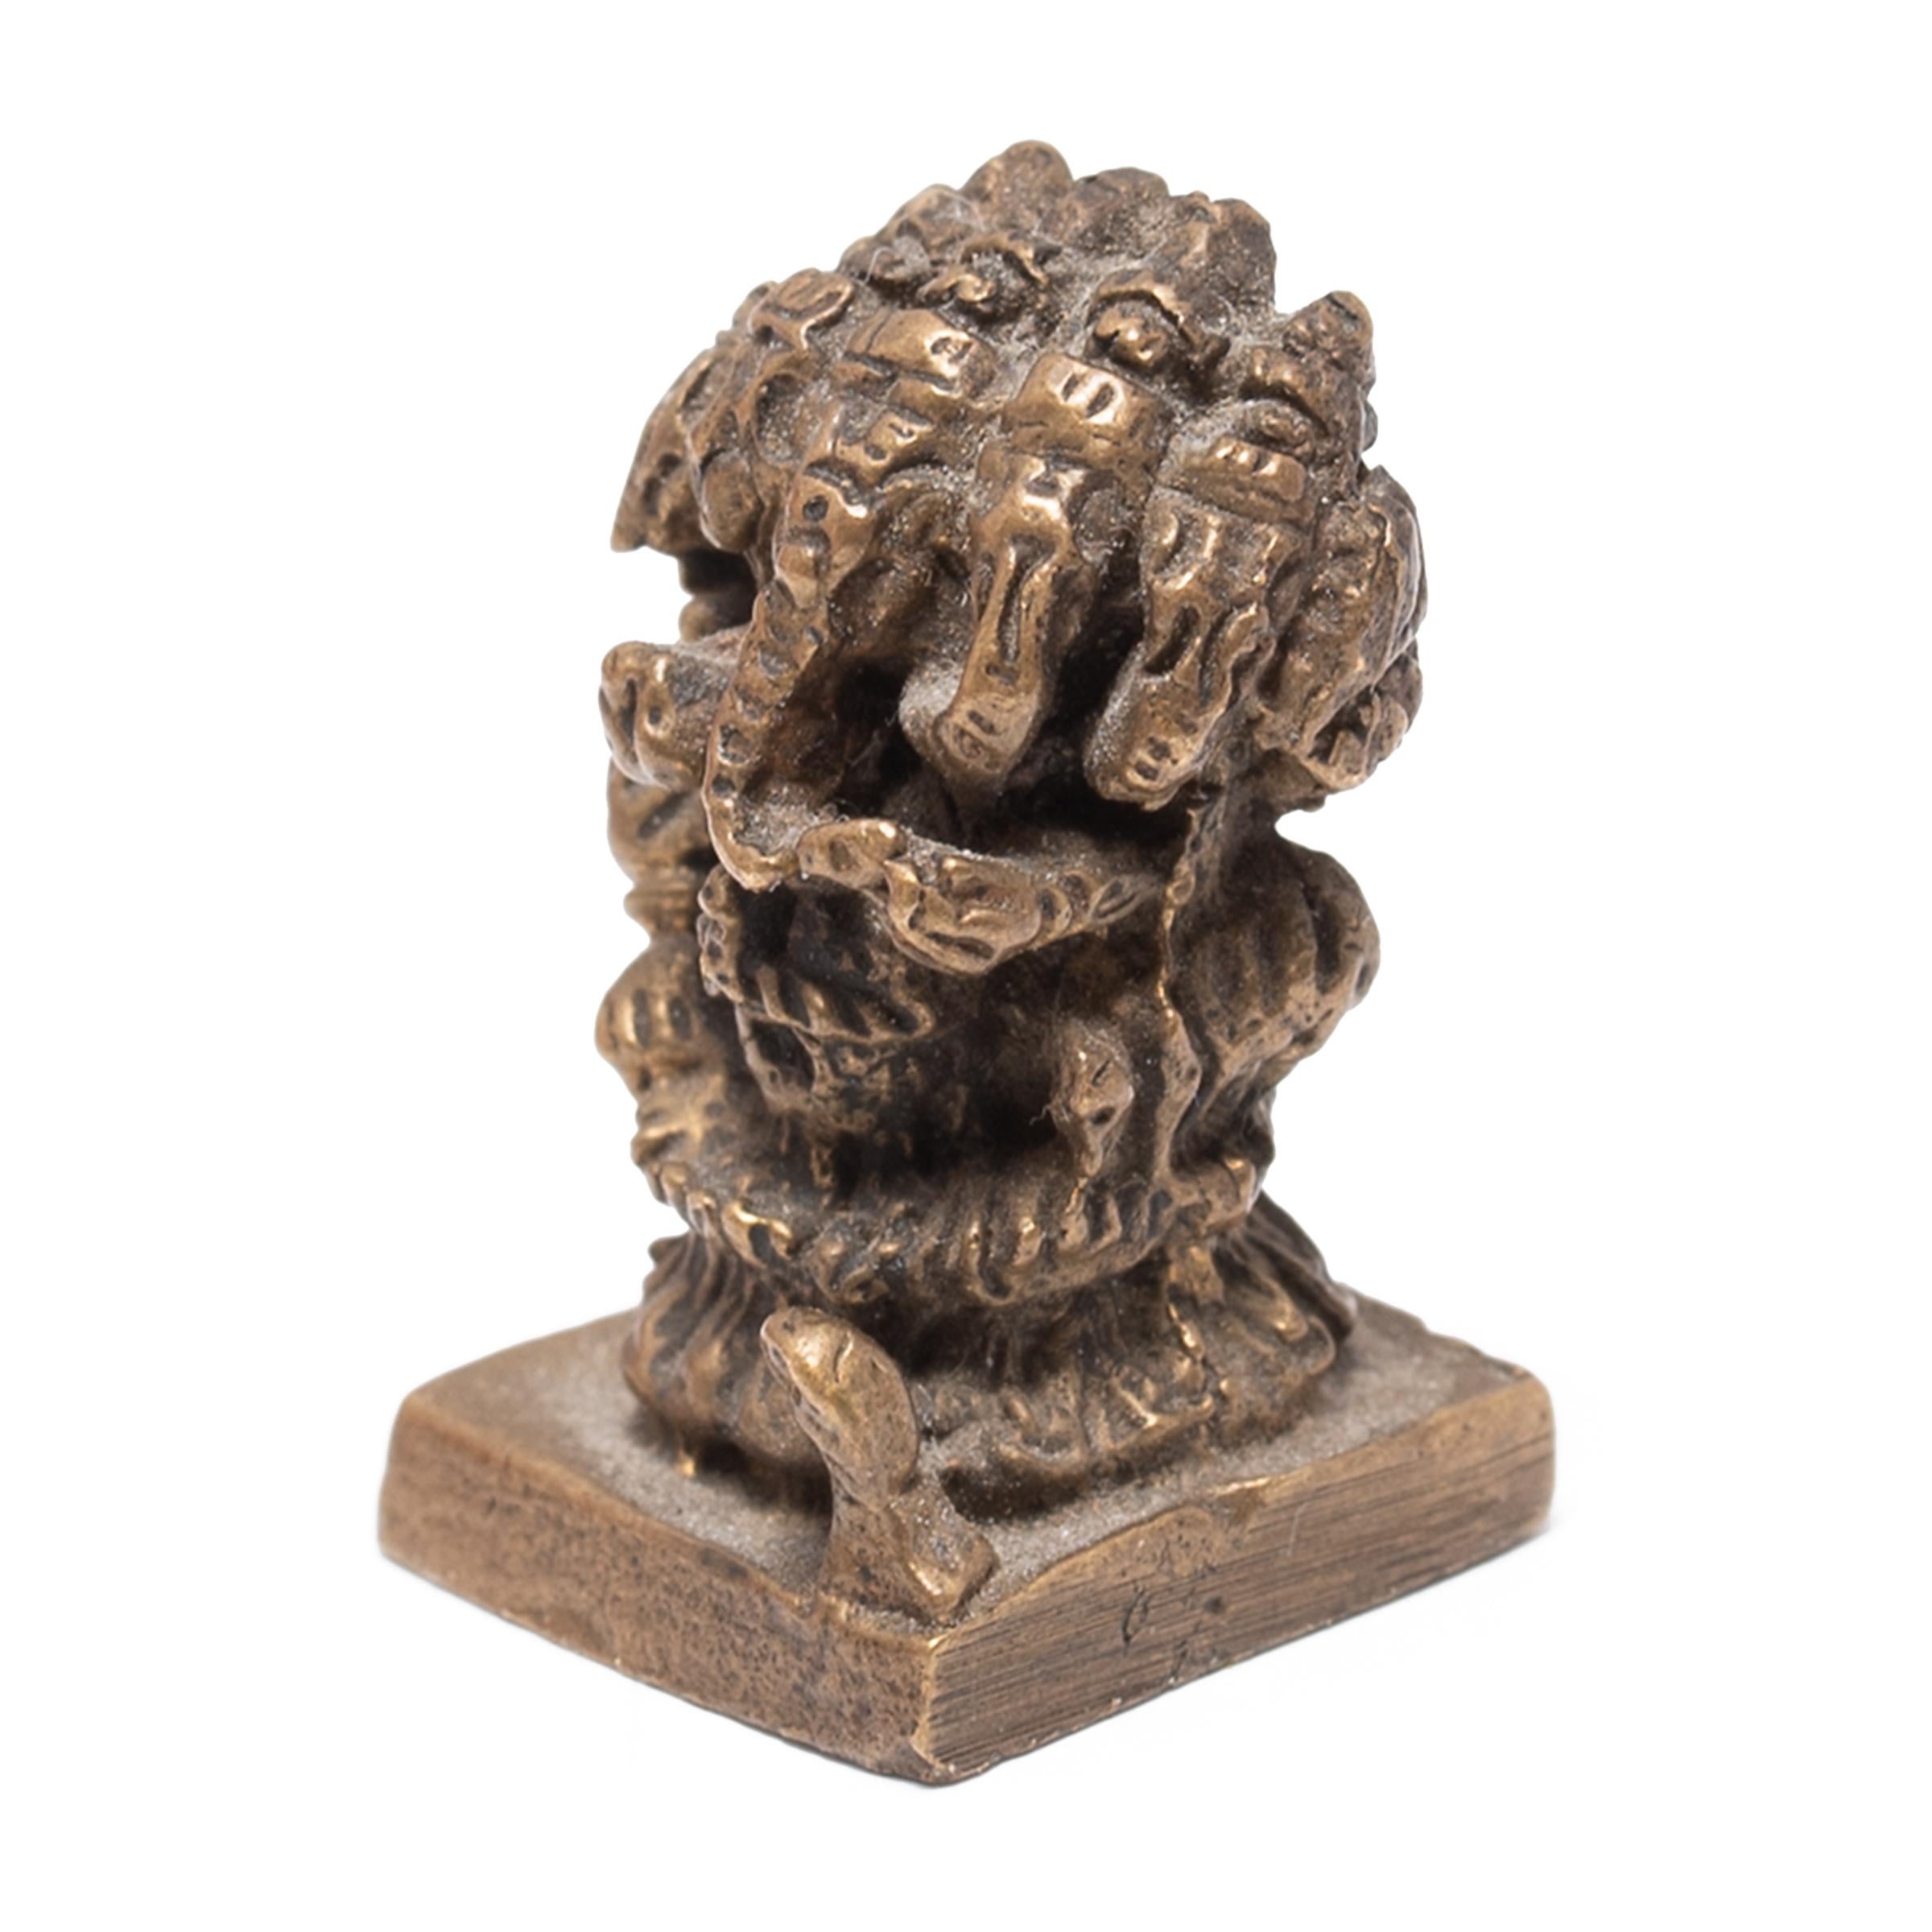 This petite brass prayer figure is cast in the likeness of Heramba Ganapati, the five-headed iconographical form of the Hindu god Ganesha. Invoked at the beginning of prayers, important undertakings, and religious ceremonies, Ganesha is a widely